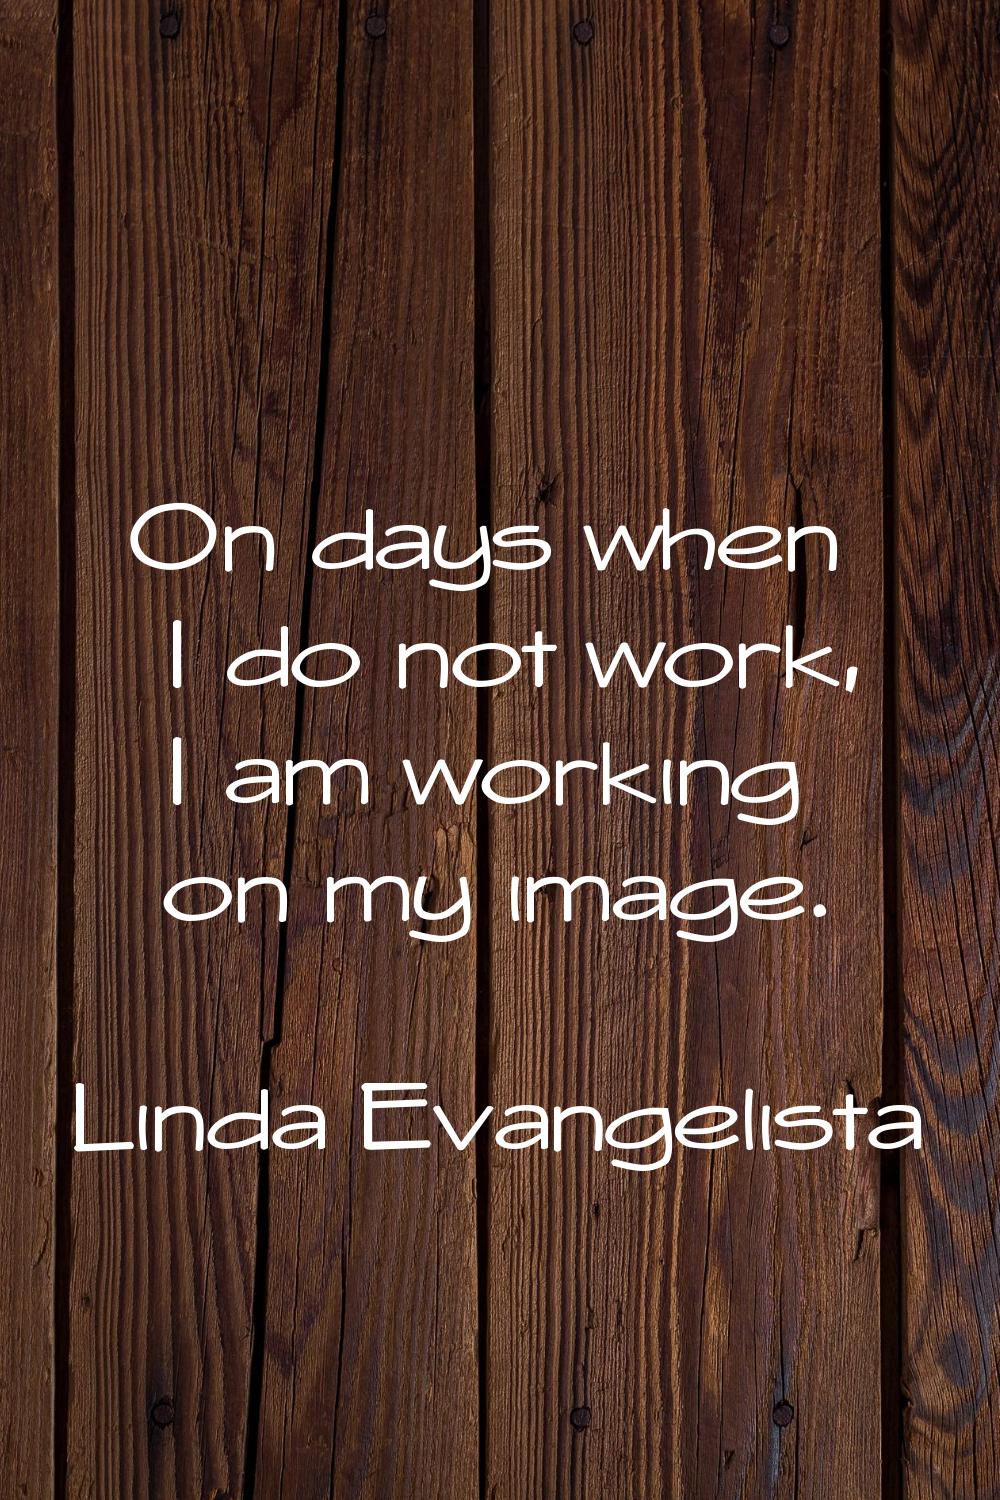 On days when I do not work, I am working on my image.